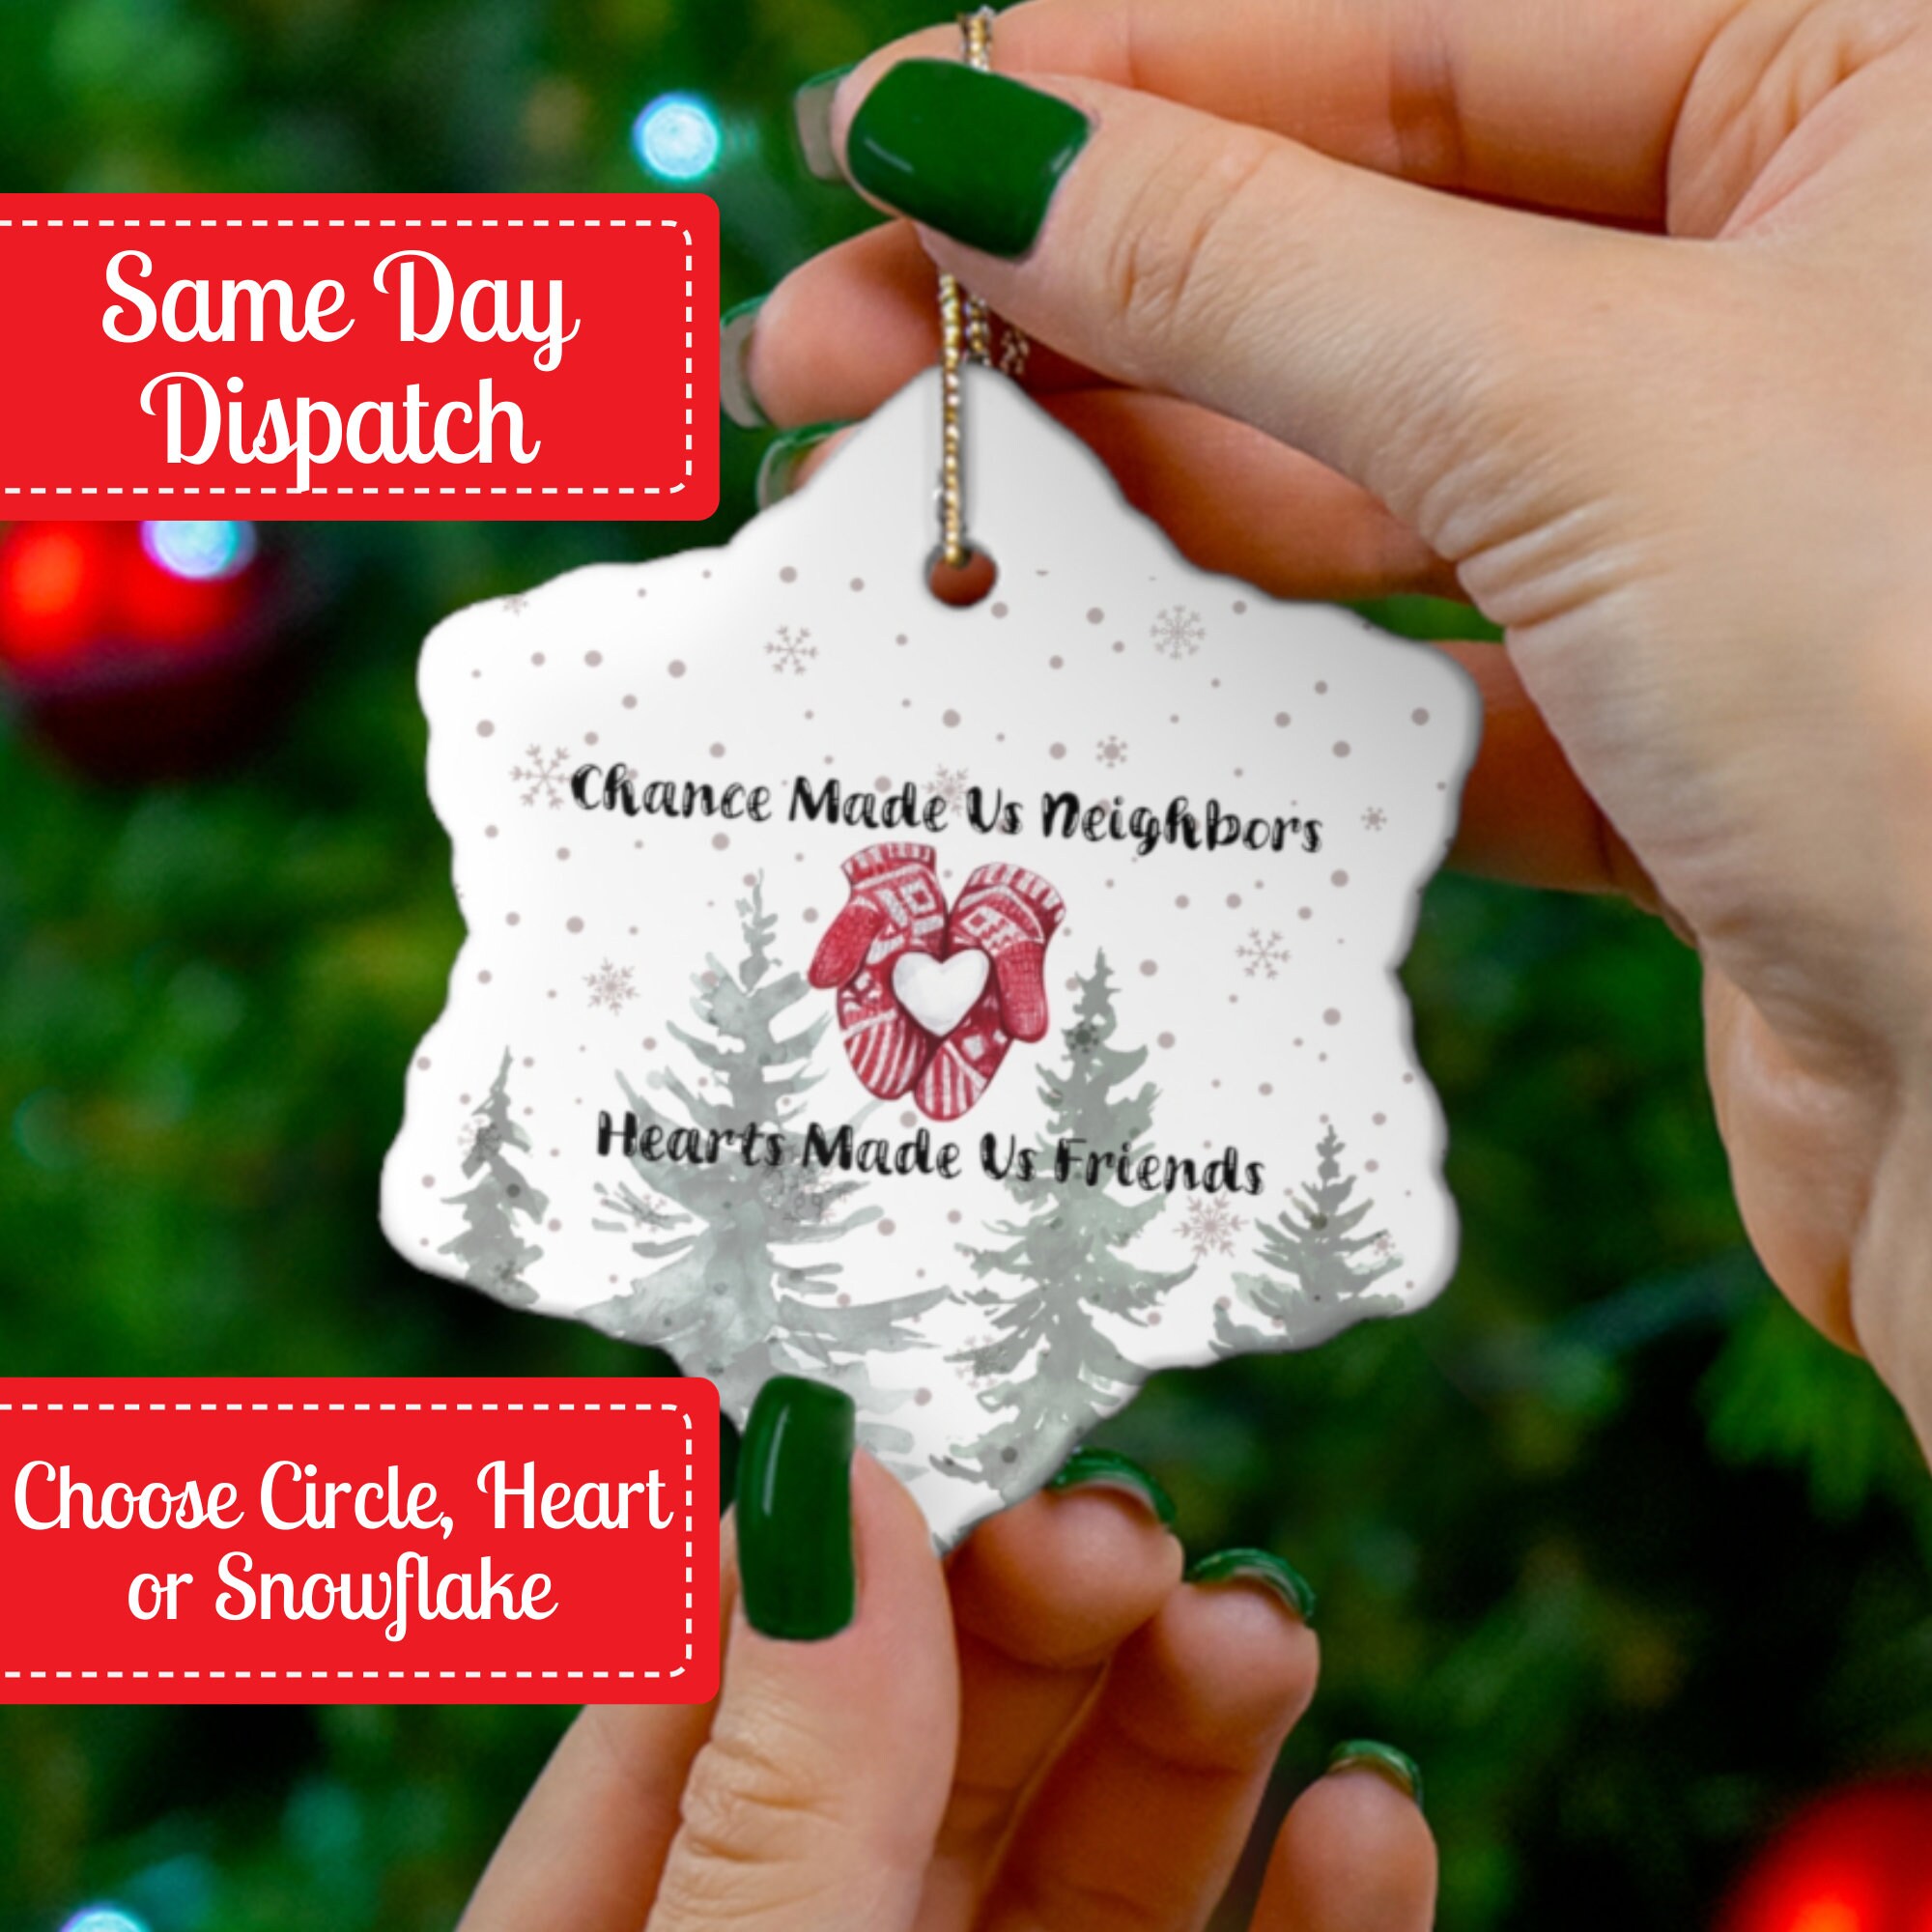 Neighbors by Chance Friends by Choice Ornament, Neighbor Christmas Gift, Neighbor  Ornament, Neighbor Moving Gift Appreciation Neighbor Gifts 